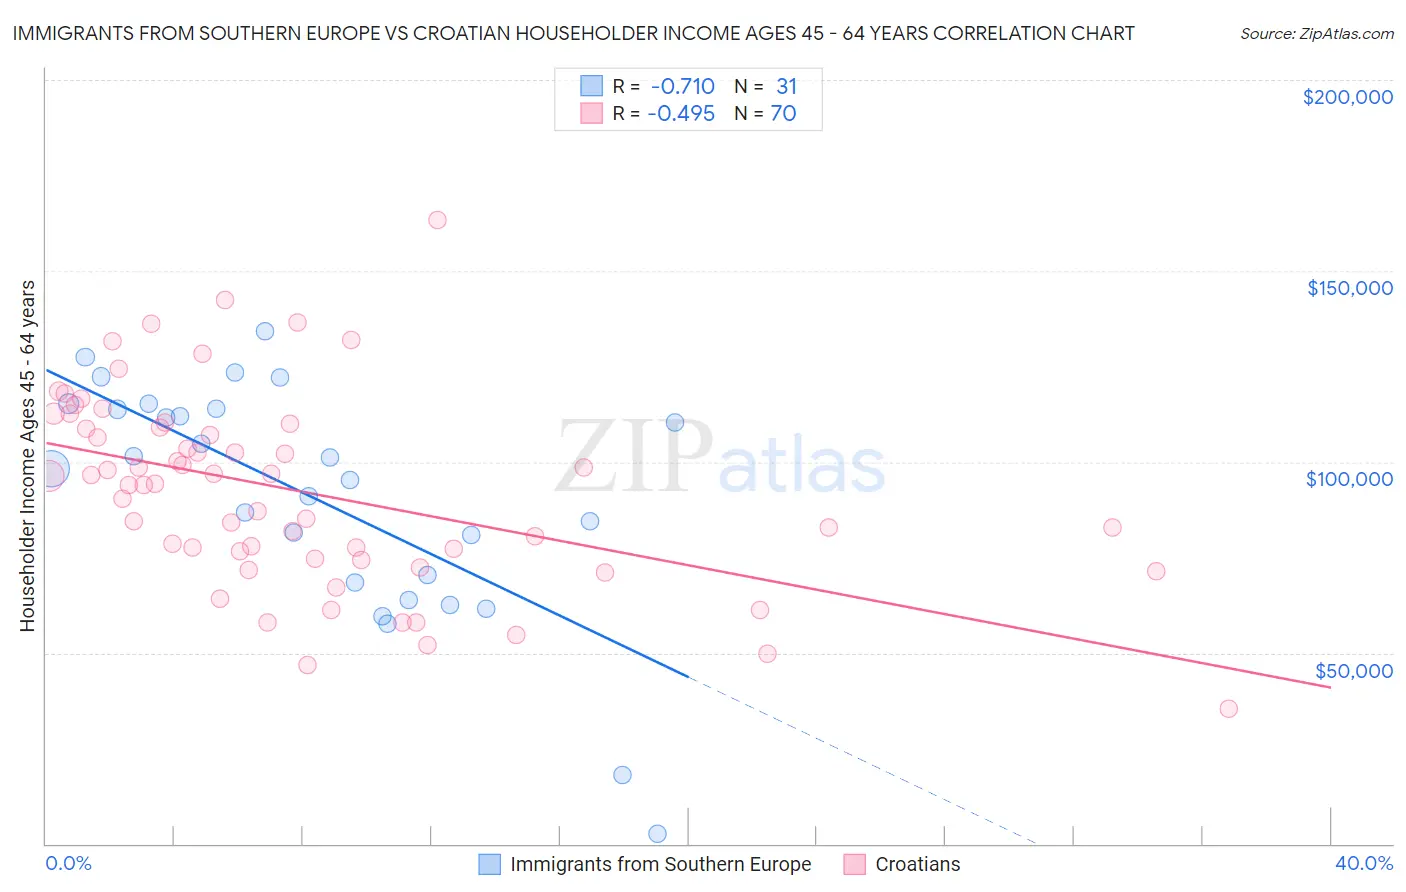 Immigrants from Southern Europe vs Croatian Householder Income Ages 45 - 64 years